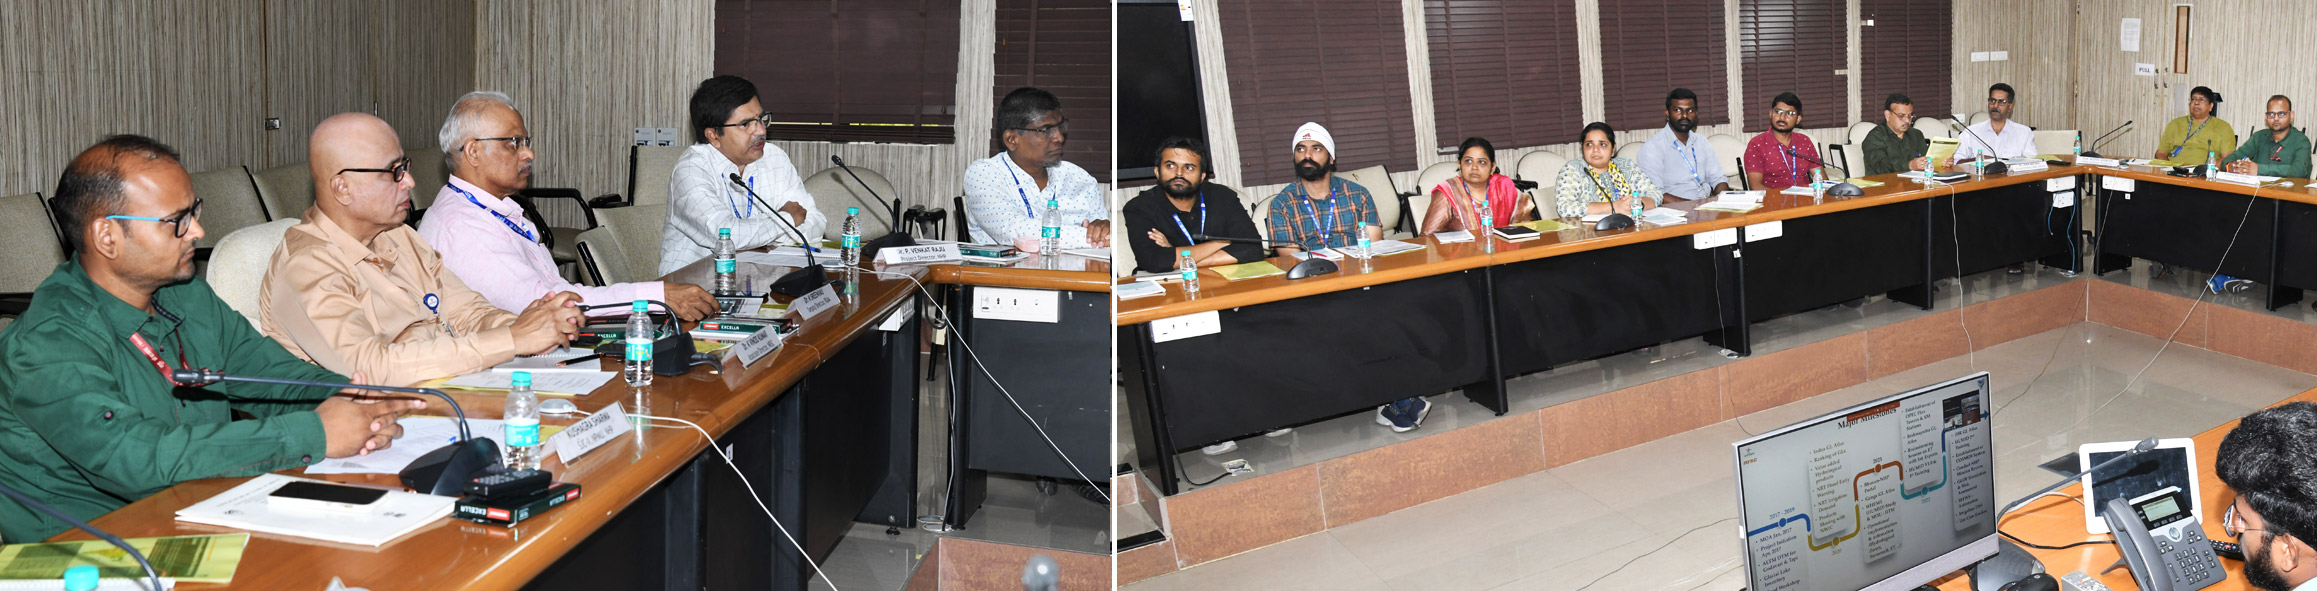 Shri Kushagra Sharma, Senior Joint Commissioner, NPMU attended the Project Management Board meeting of NHP at NRSC, Hyderabad. DD, CGM of NRSC and officers from IIRS, NESAC and ISRO also participated in this special event.